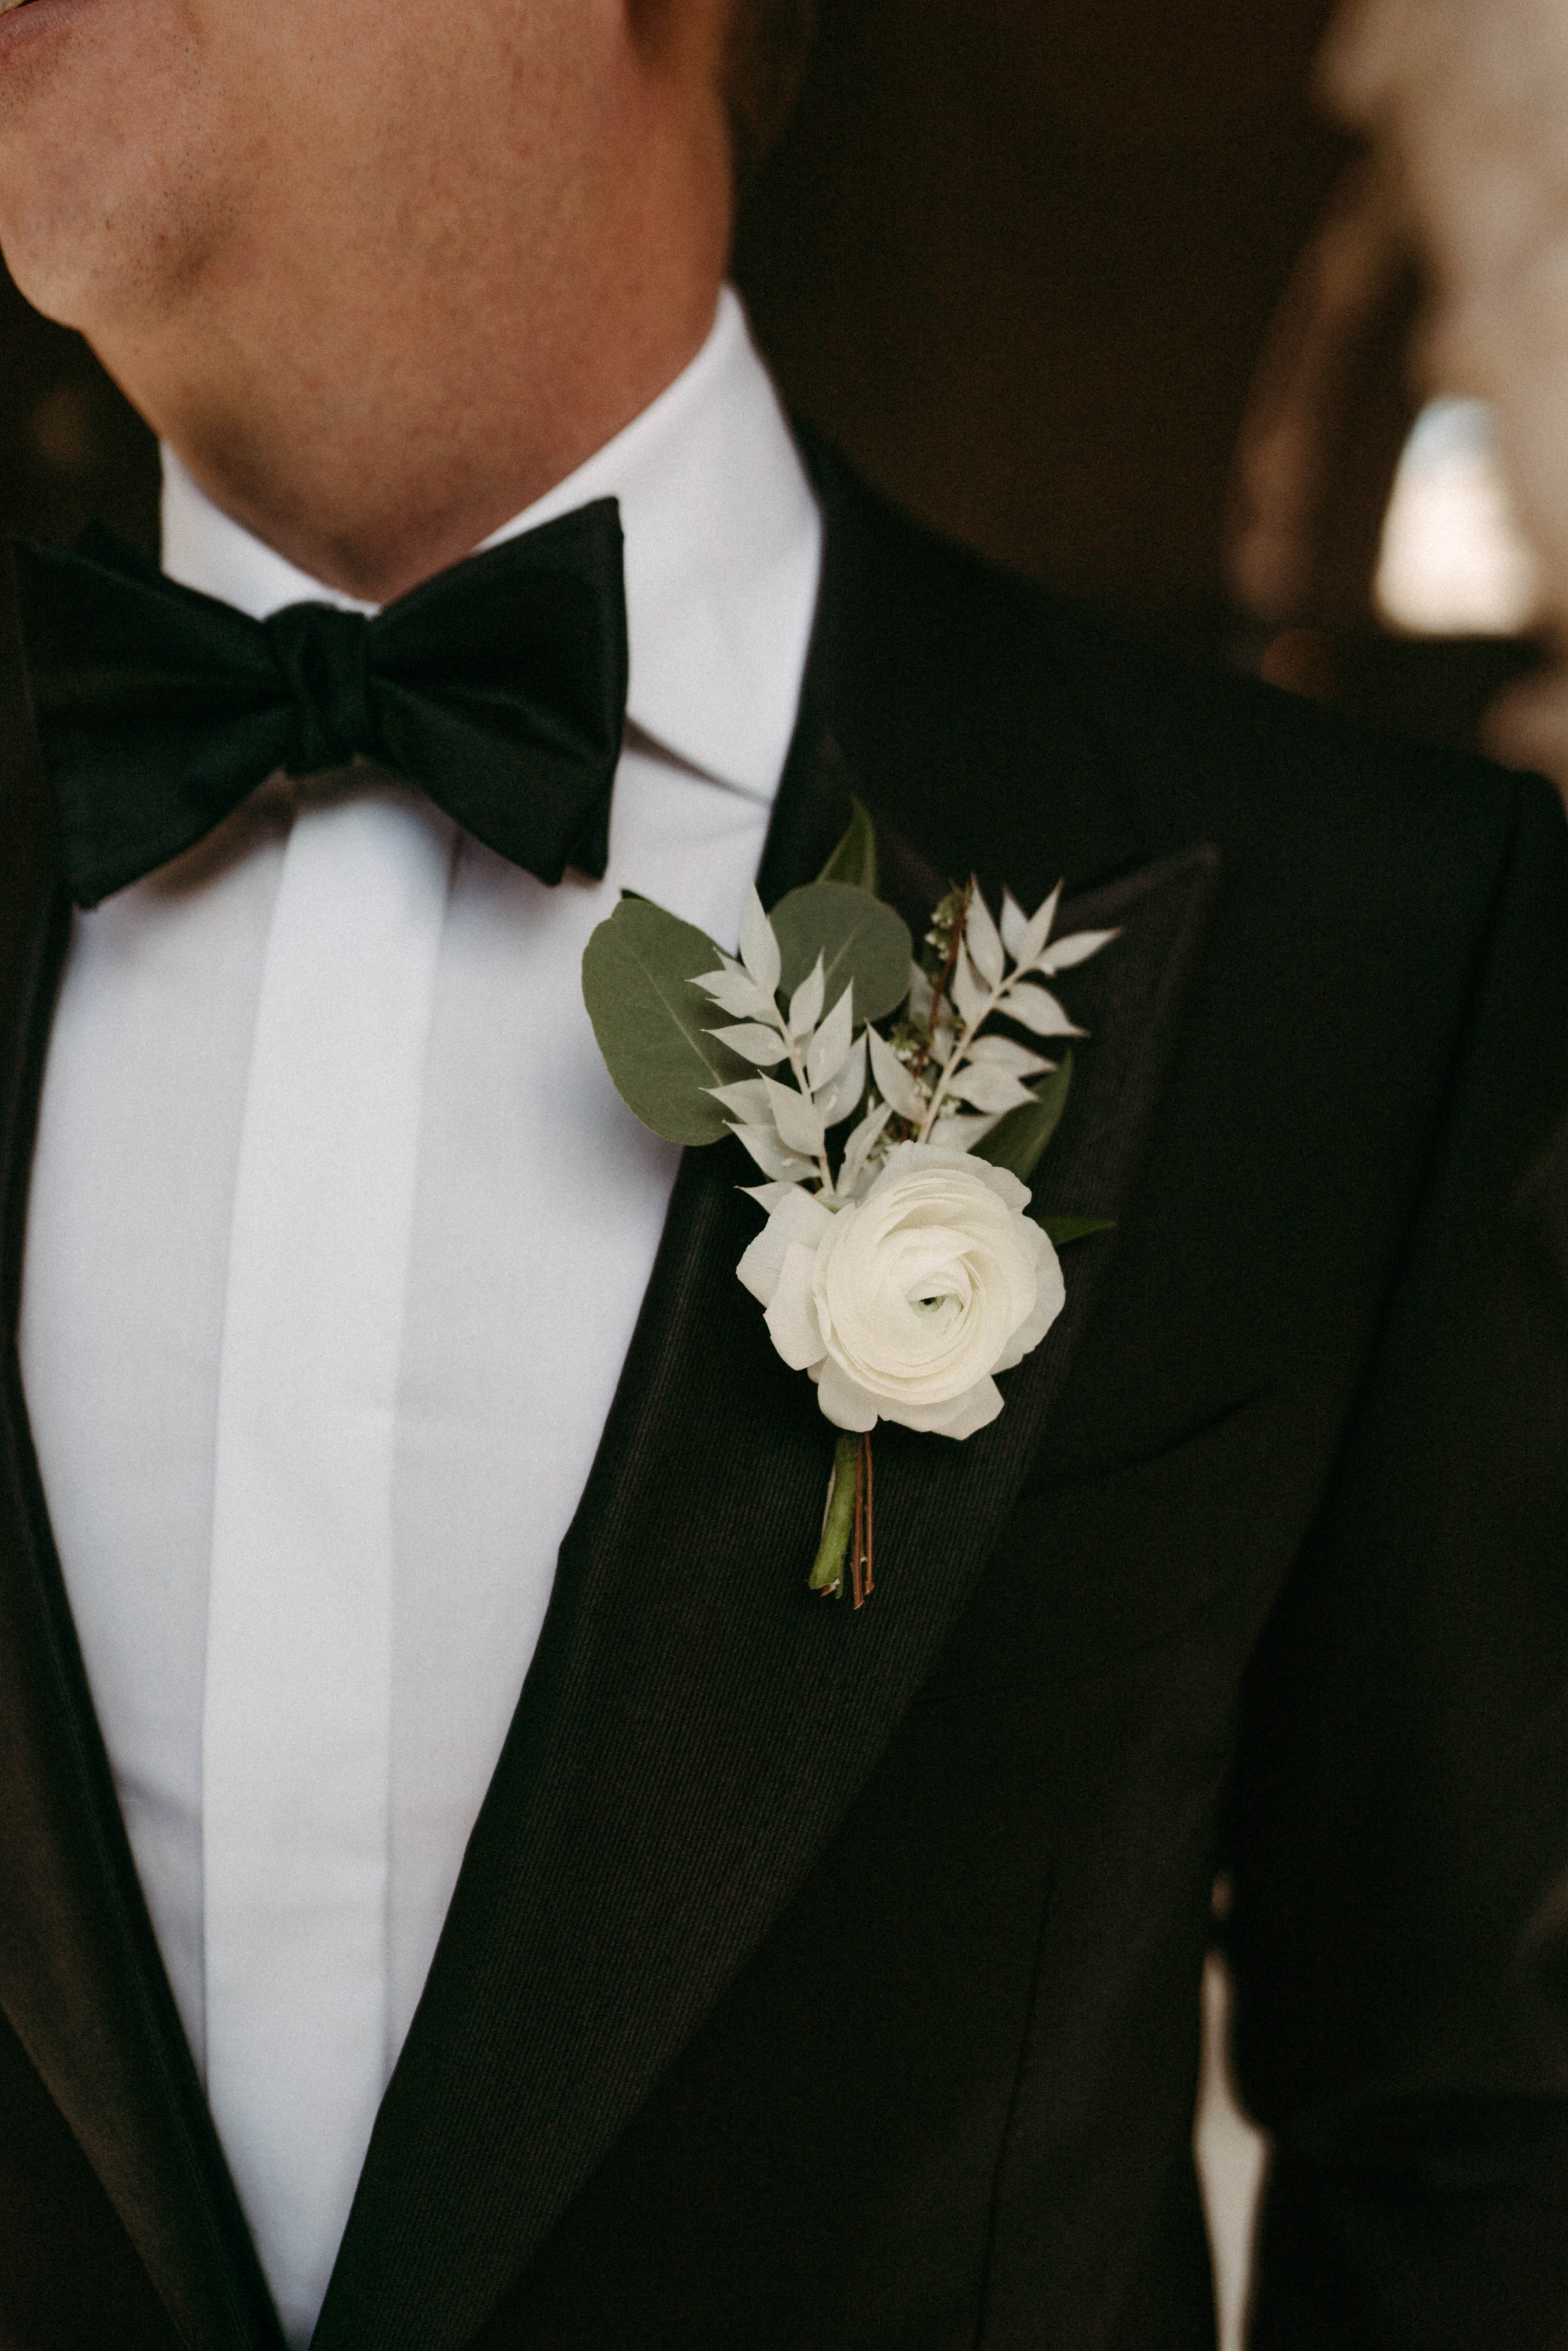 Groom's Details for His San Francisco City Hall Elopement